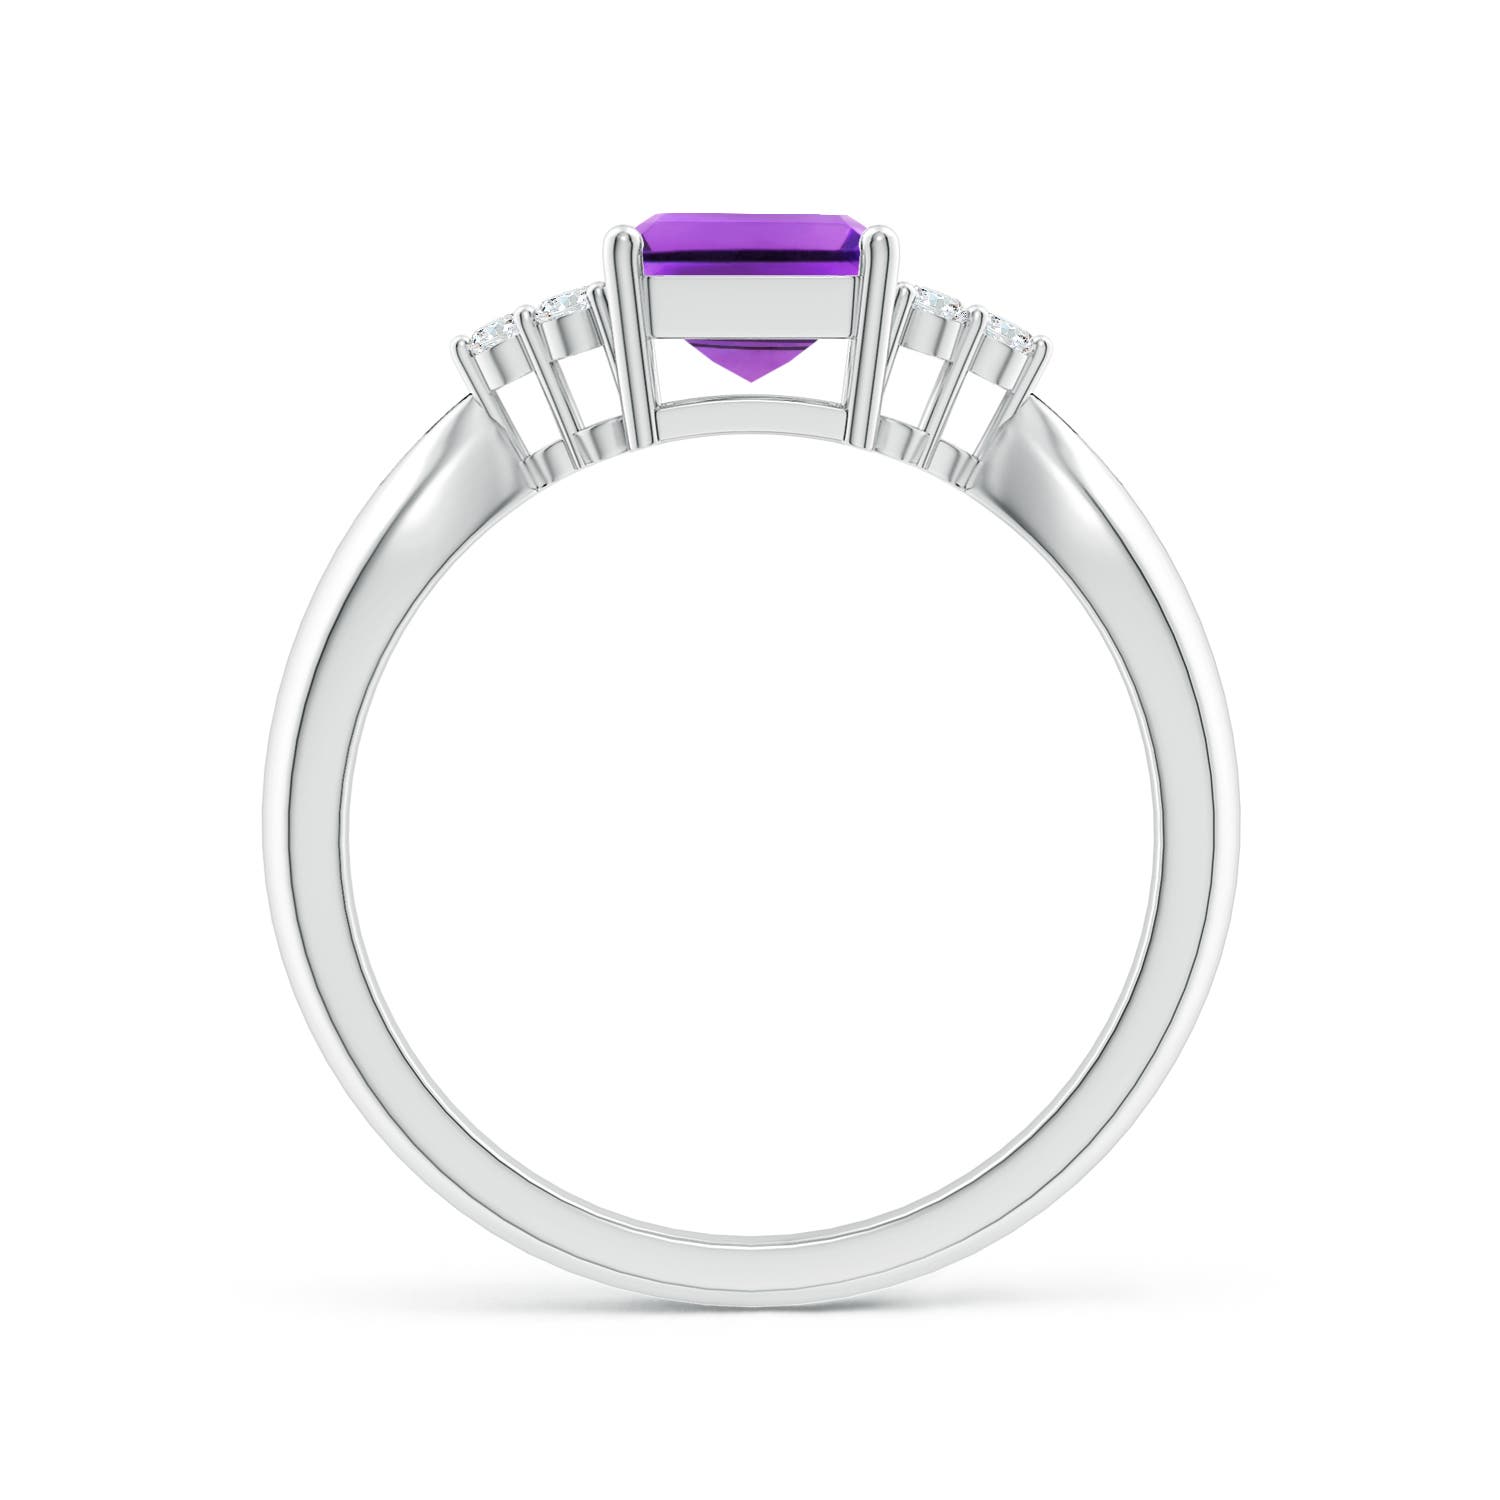 AAA - Amethyst / 1.67 CT / 14 KT White Gold